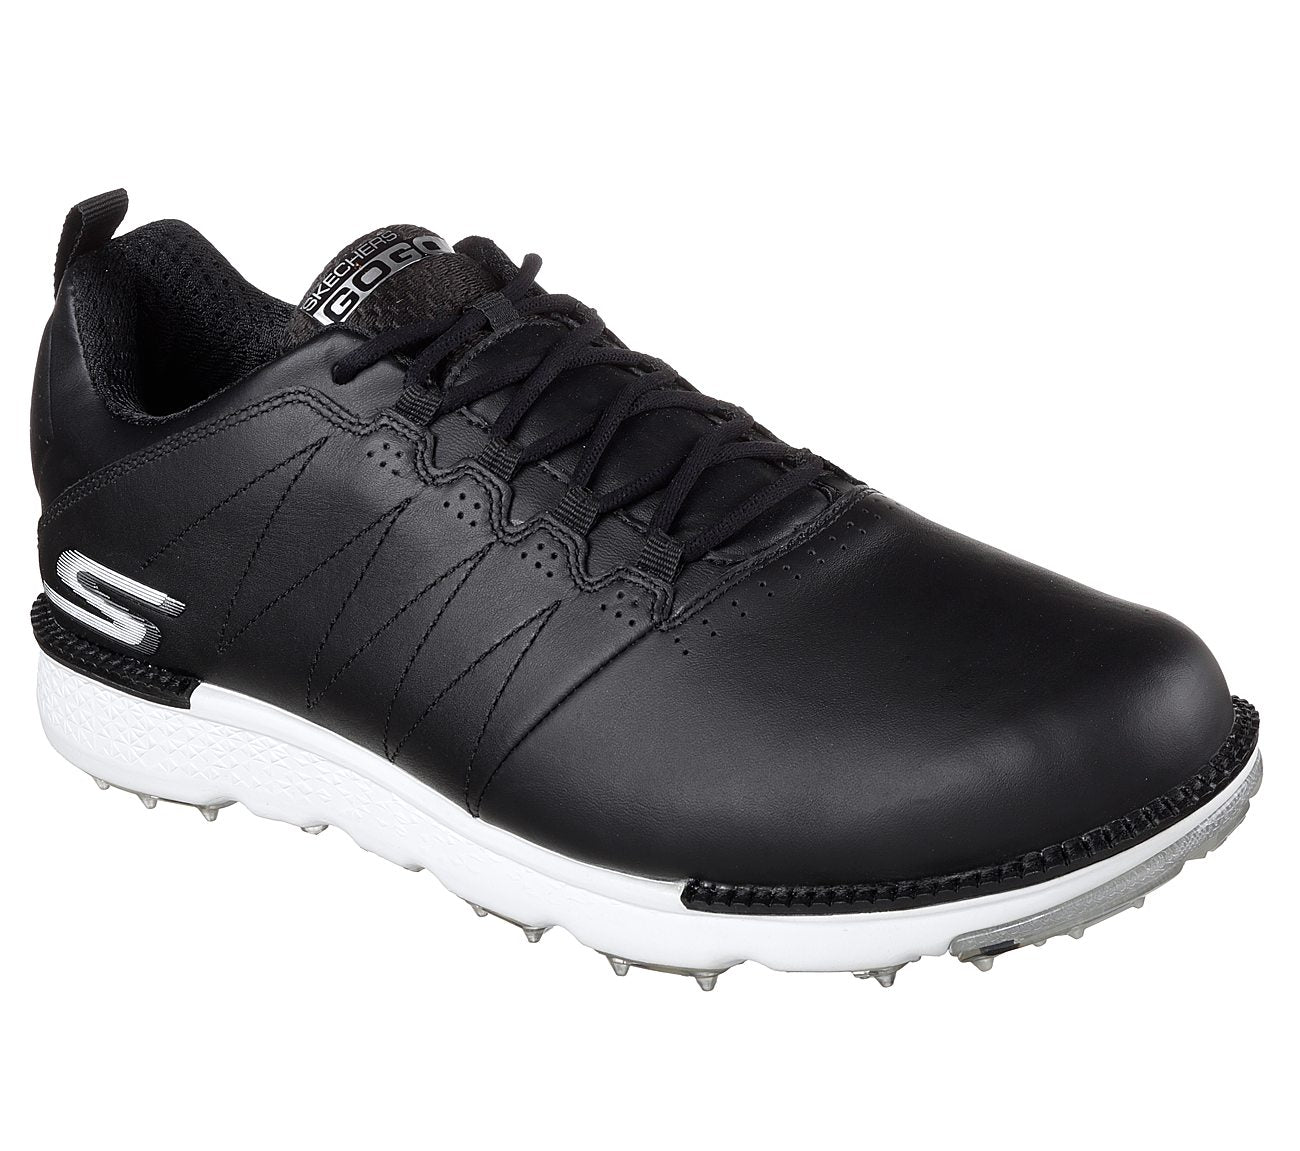 skechers white golf shoes